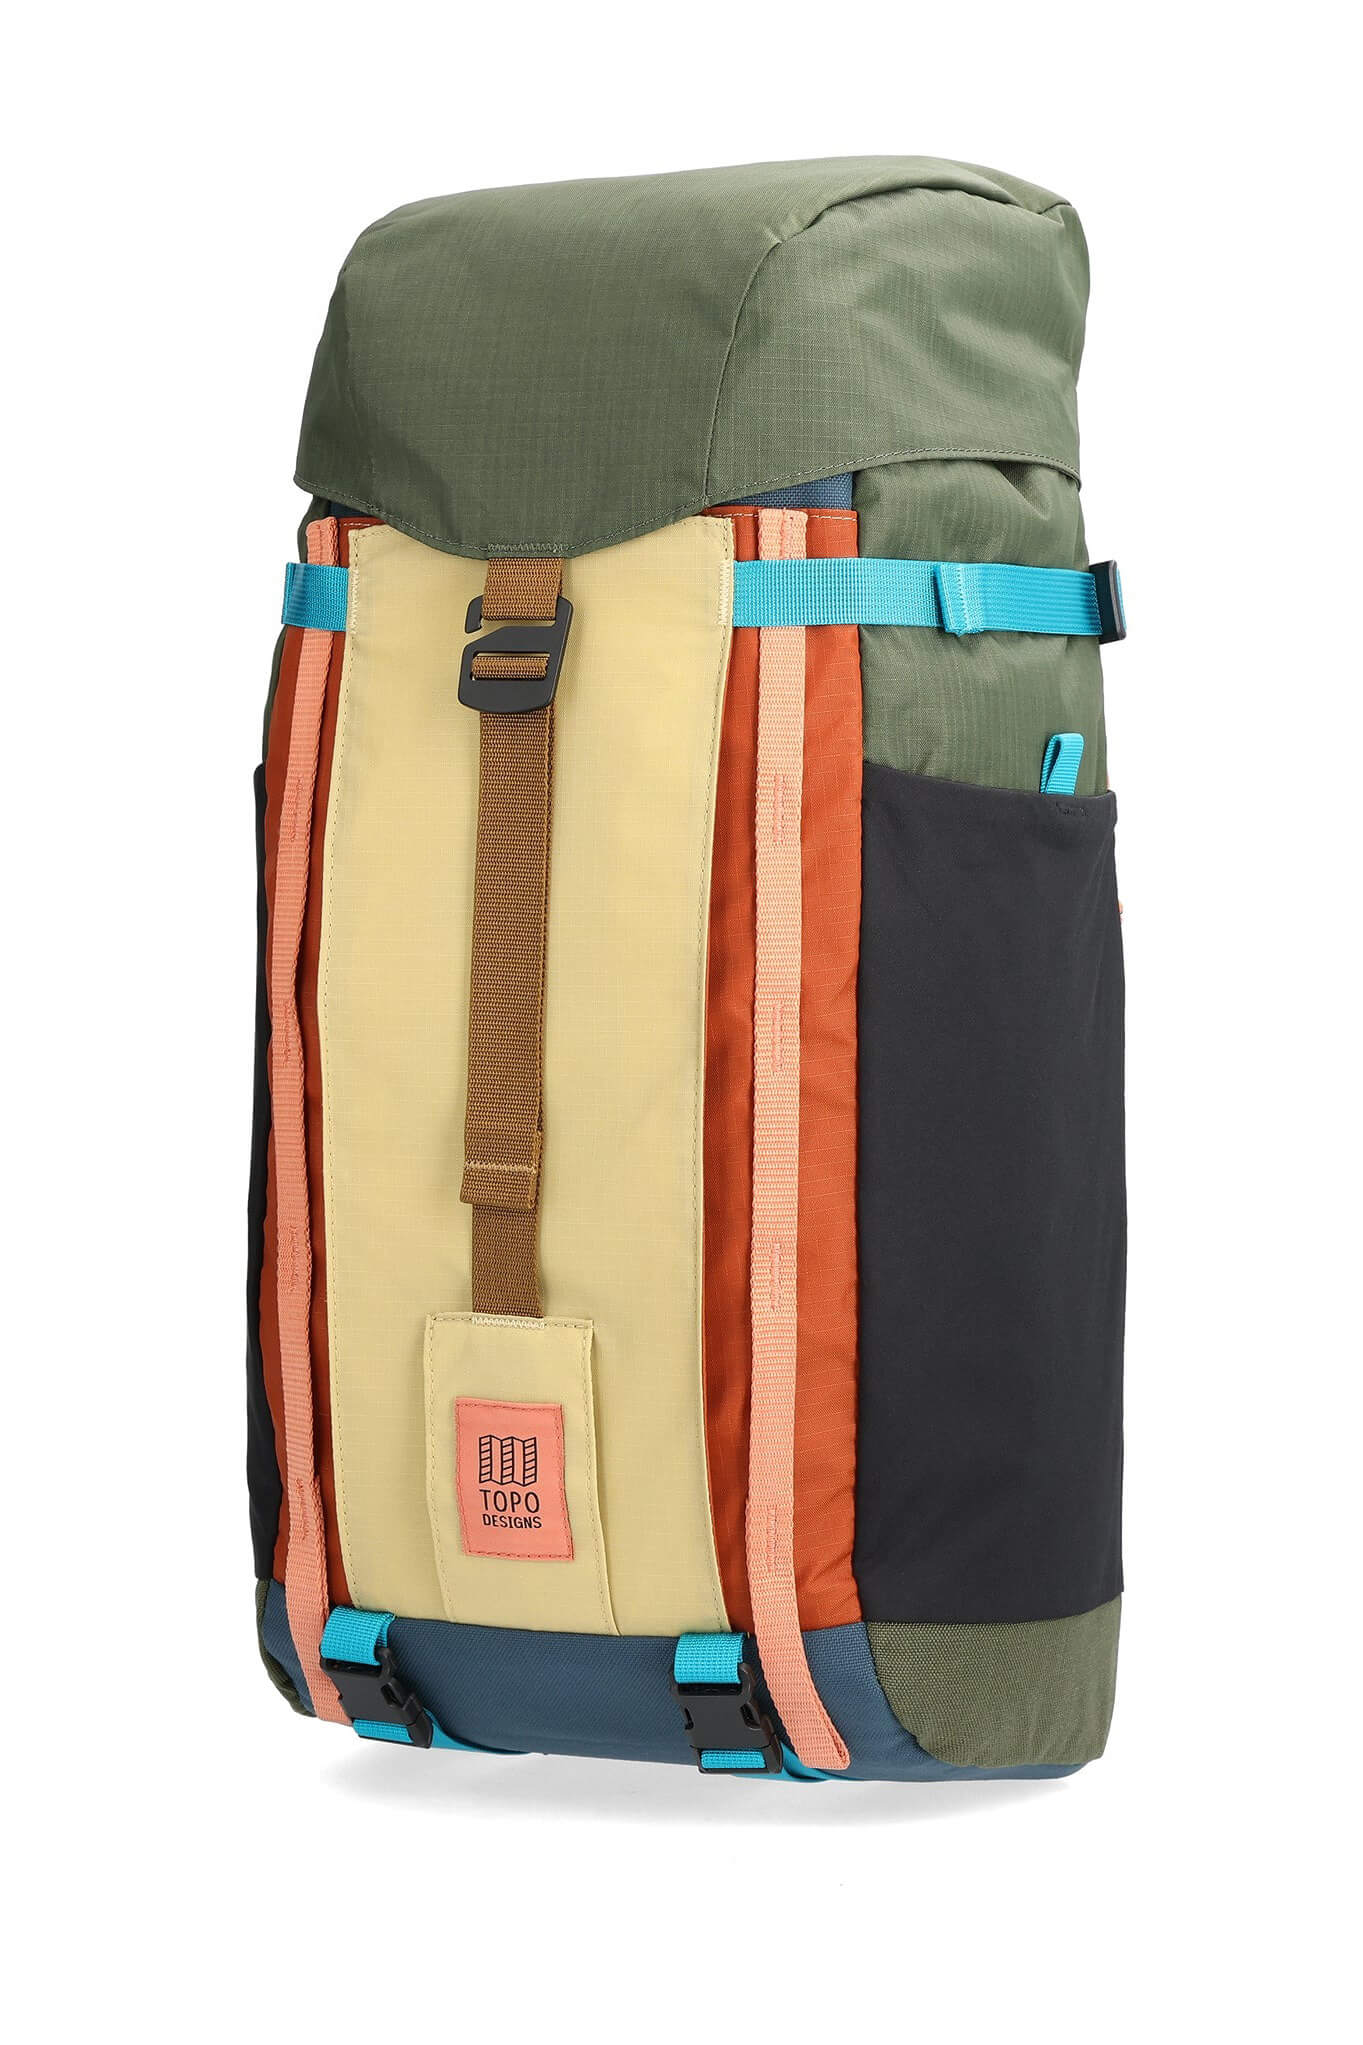 Topo Designs mountain pack 2.0 16L in olive and hemp